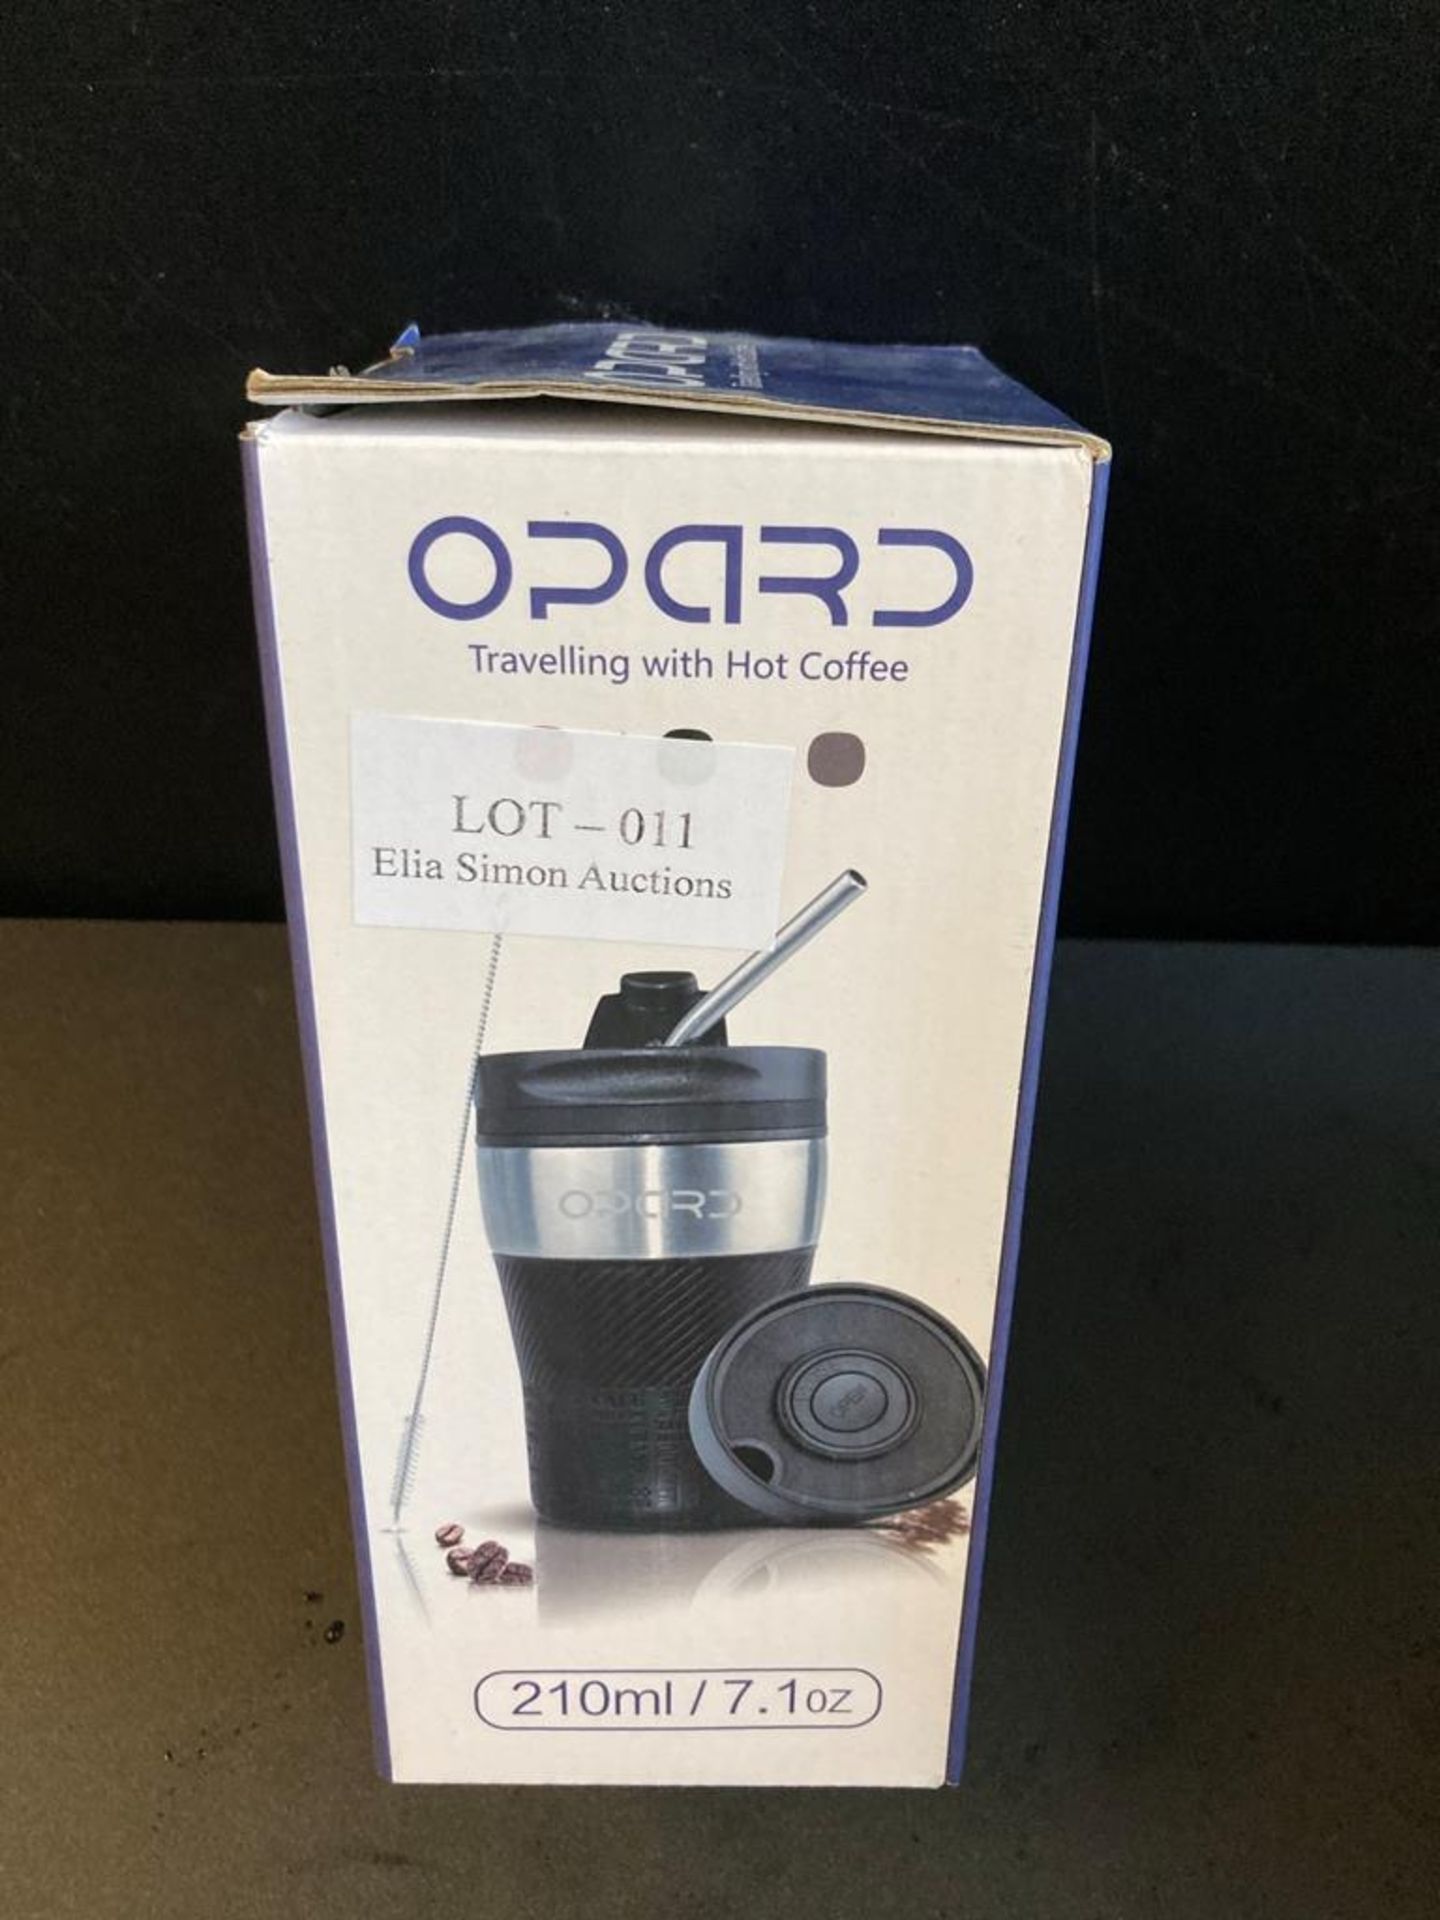 Opard Coffee Cup Double Walled Vacuum Insulated Stainless Steel with Leakproof Lid Coffee Travel Mug - Image 2 of 2